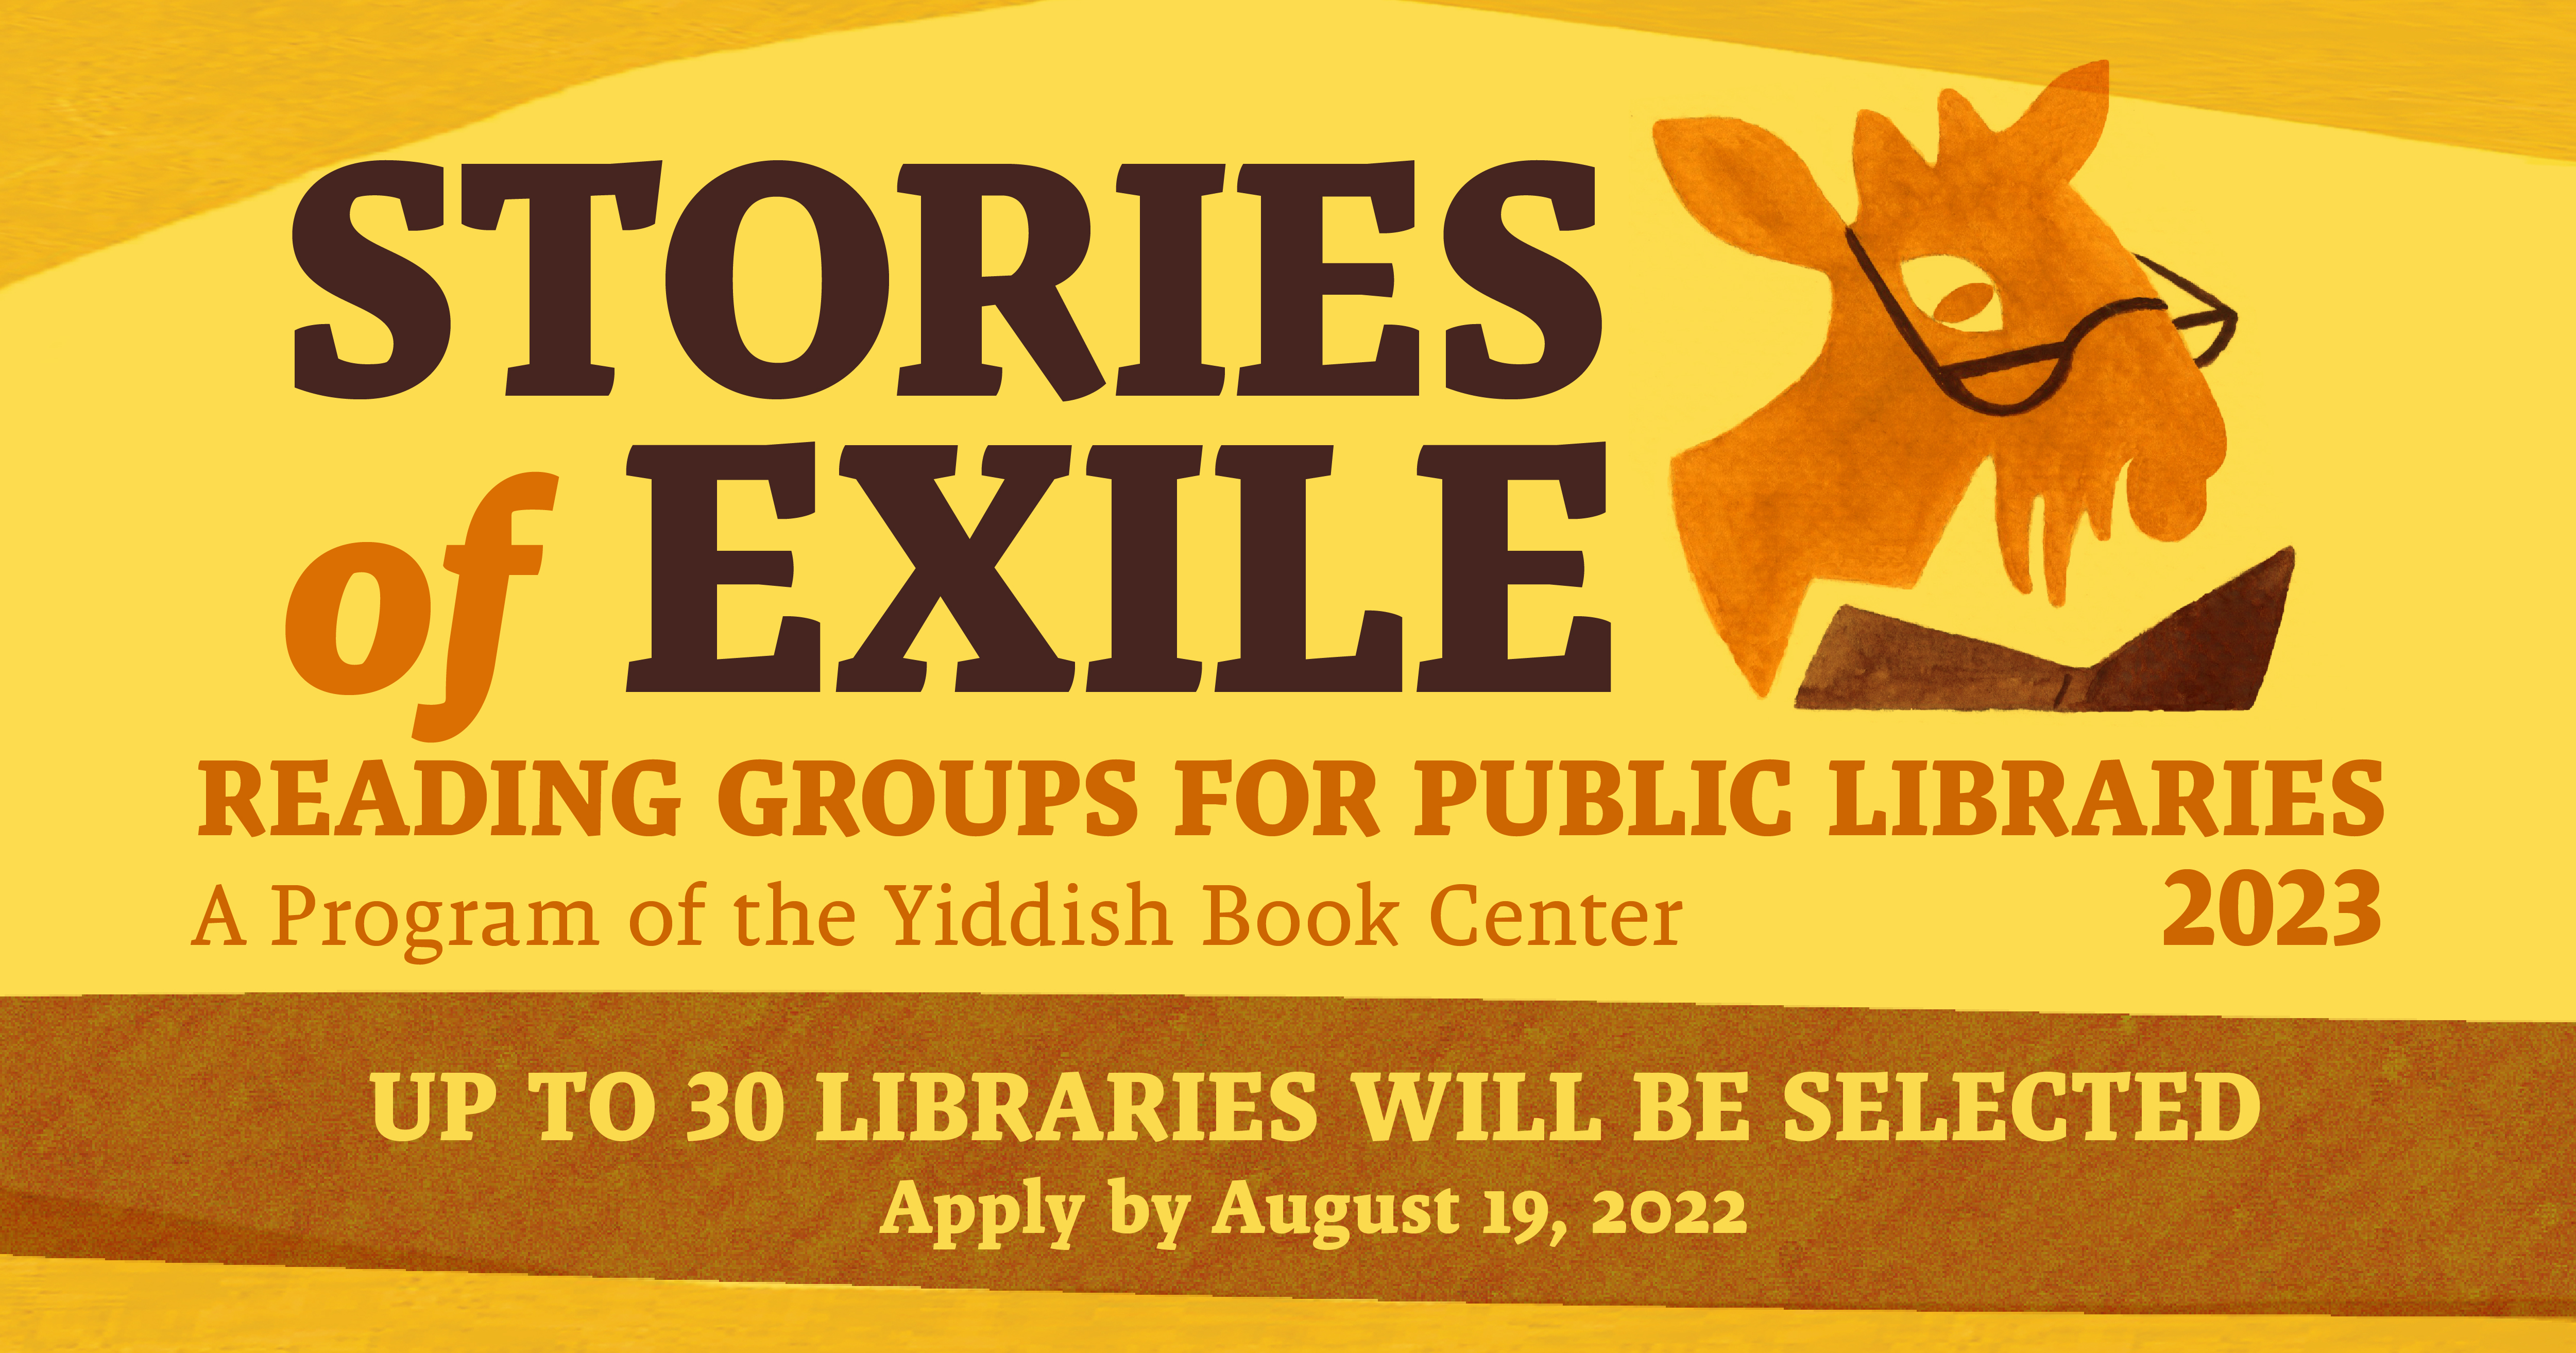  "Stories of Exile" Reading Groups for Public Libraries" A program of the Yiddish Book Center. Up to 30 libraries will be selected. Apply by August 19, 2022.